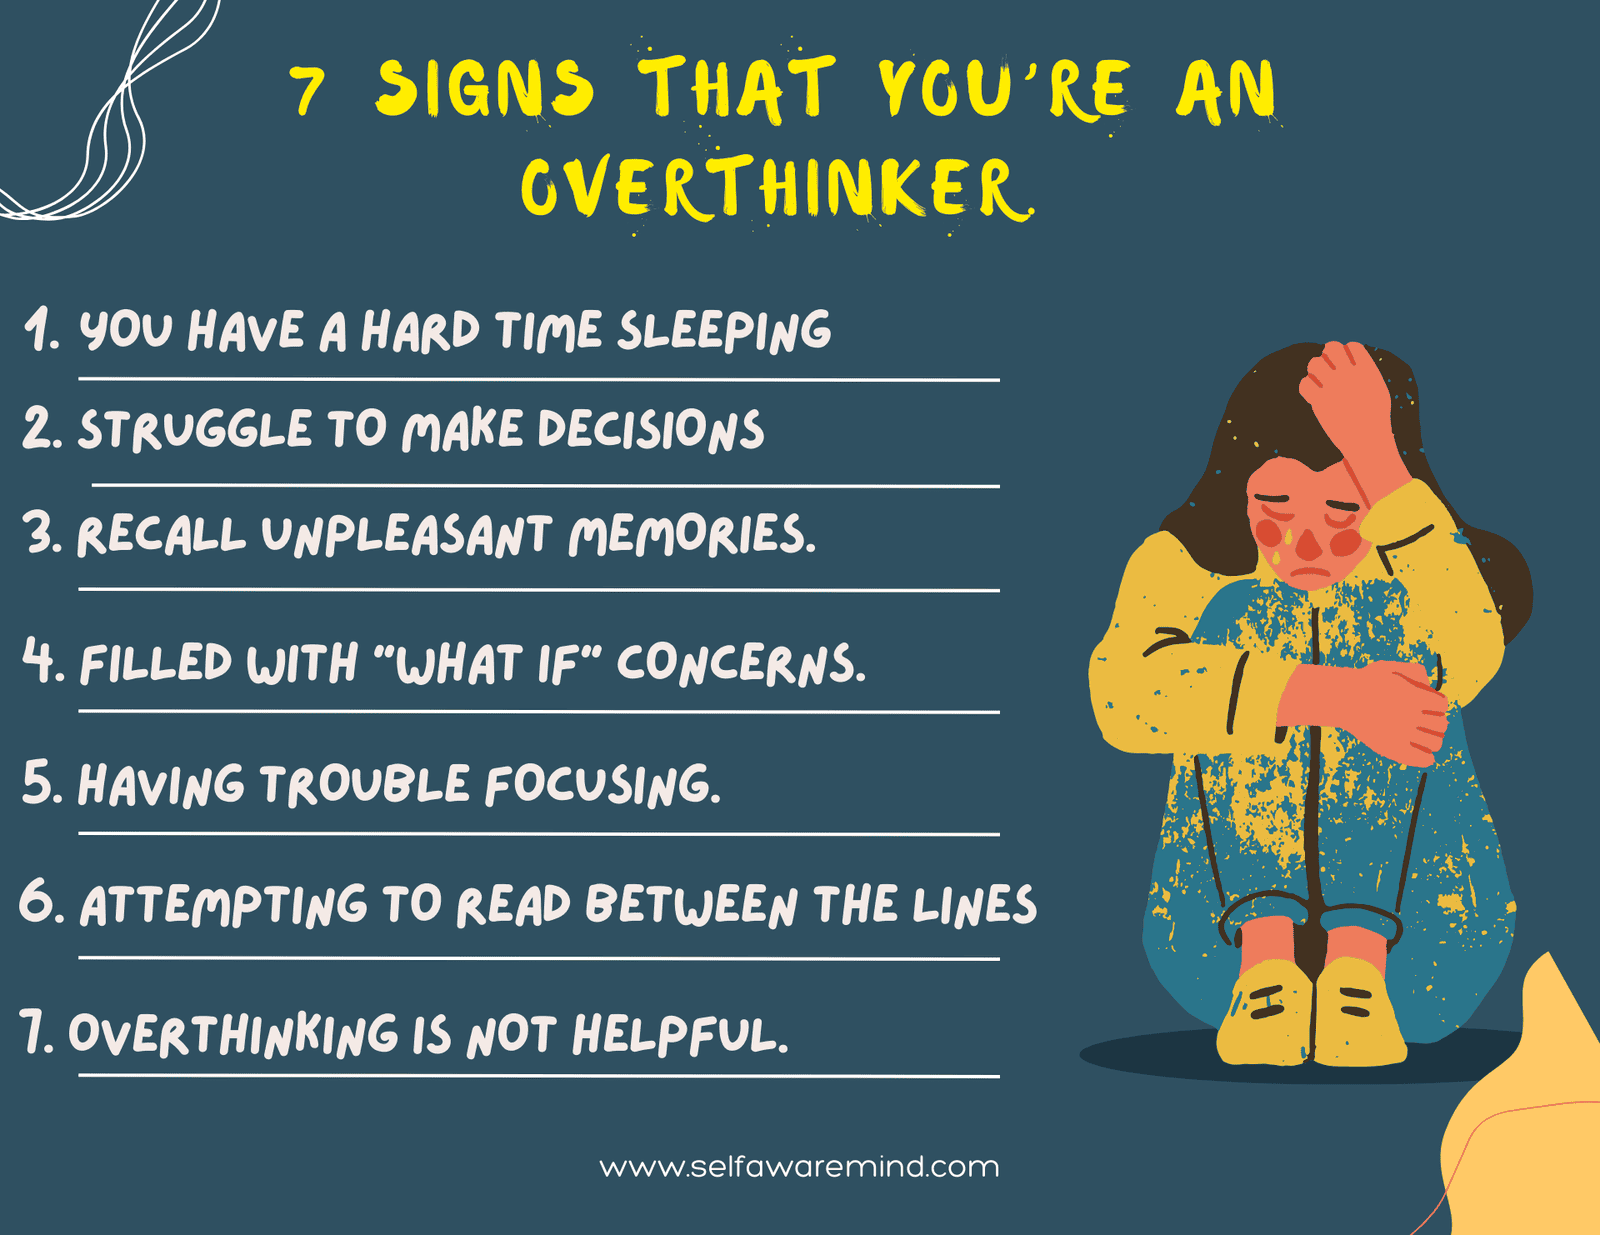 7 signs that you’re an overthinker.